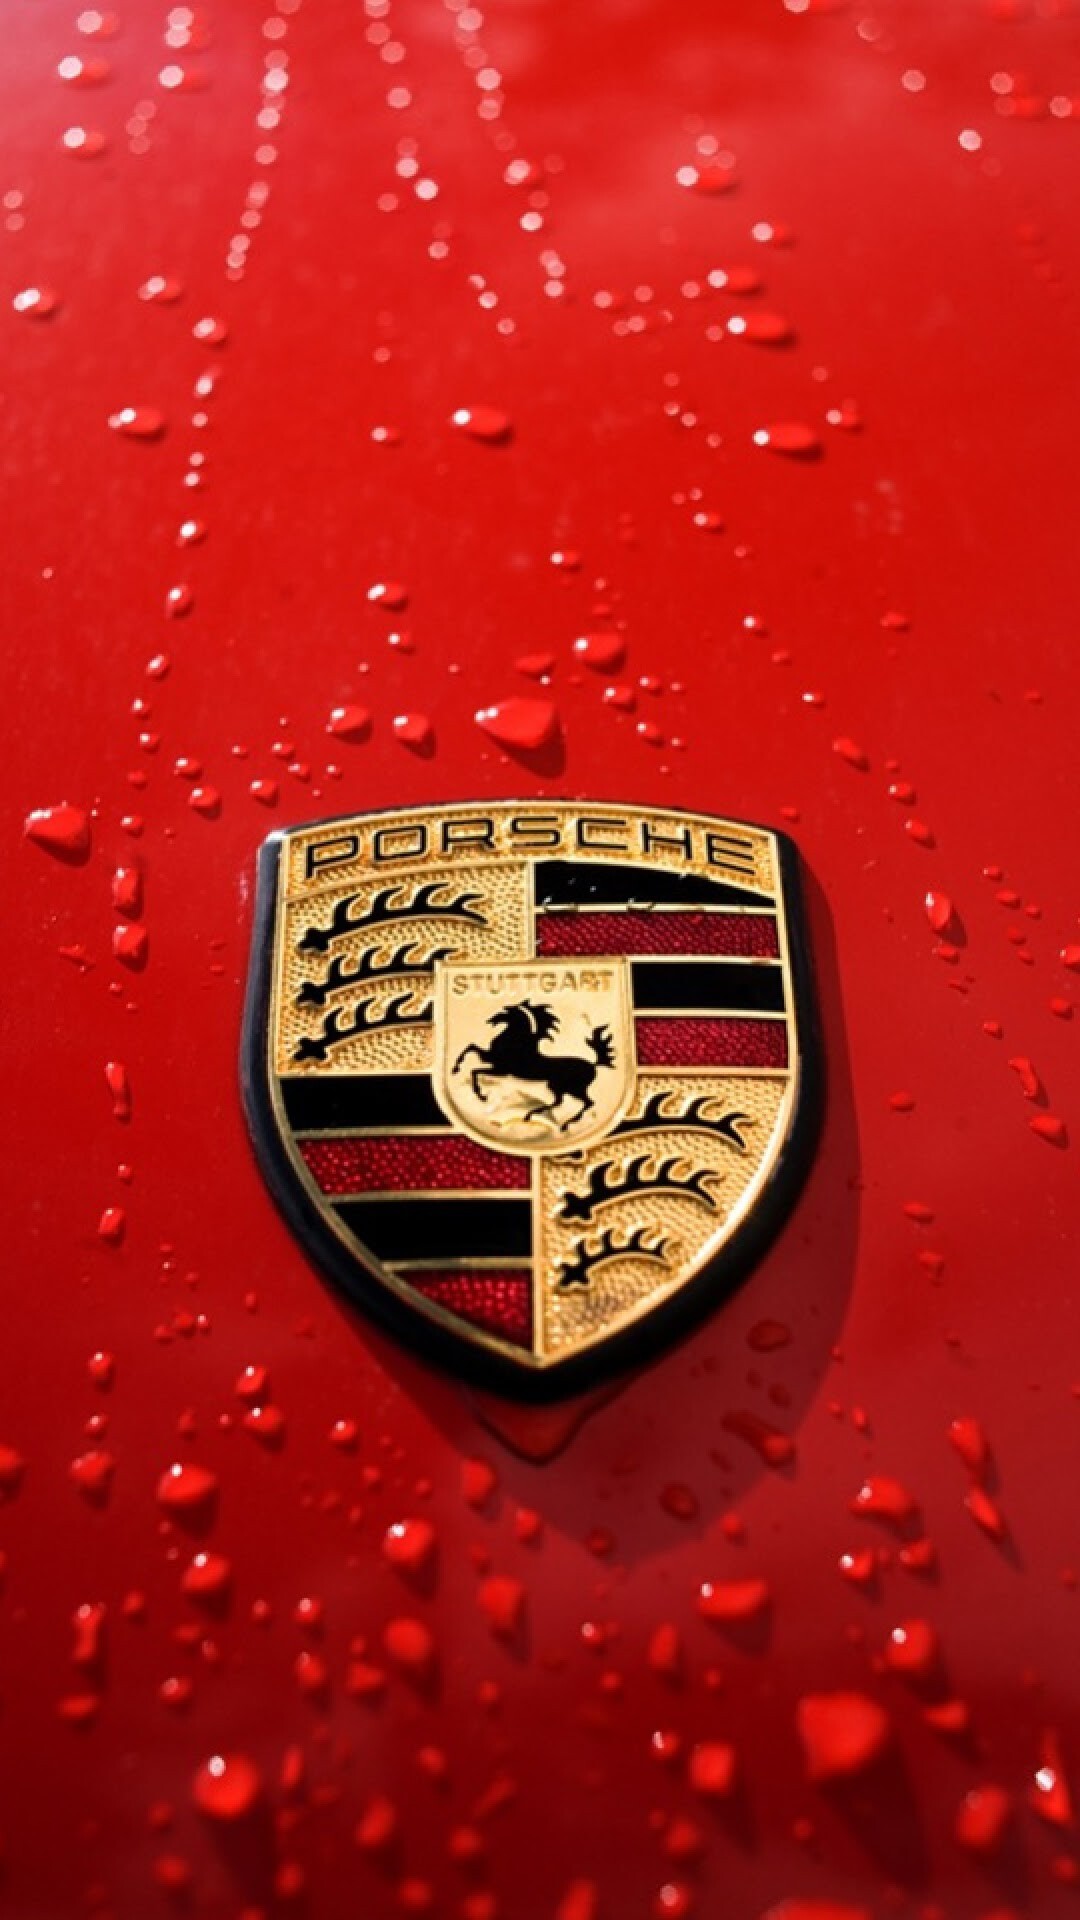 Porsche: The face of luxury and powerful performance, Logo is originally based on the “Coat of Arms of the Free People State”. 1080x1920 Full HD Wallpaper.